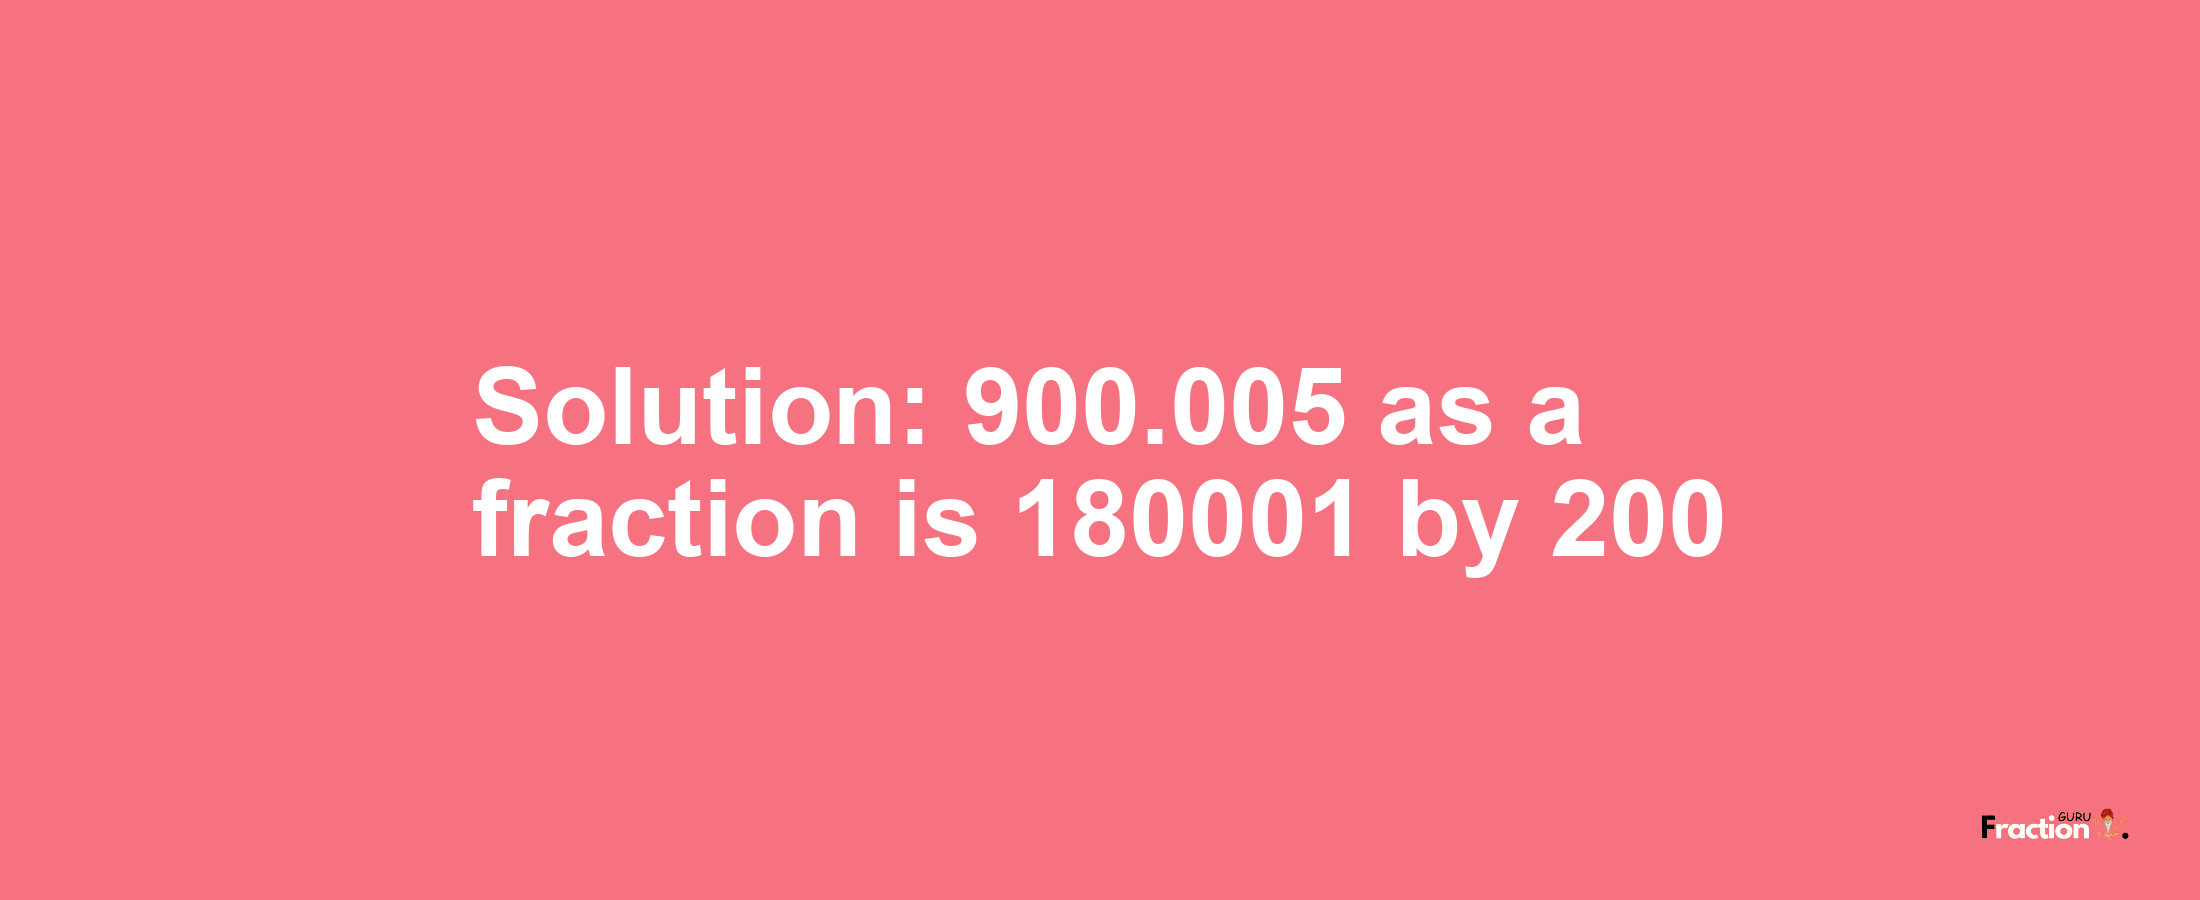 Solution:900.005 as a fraction is 180001/200